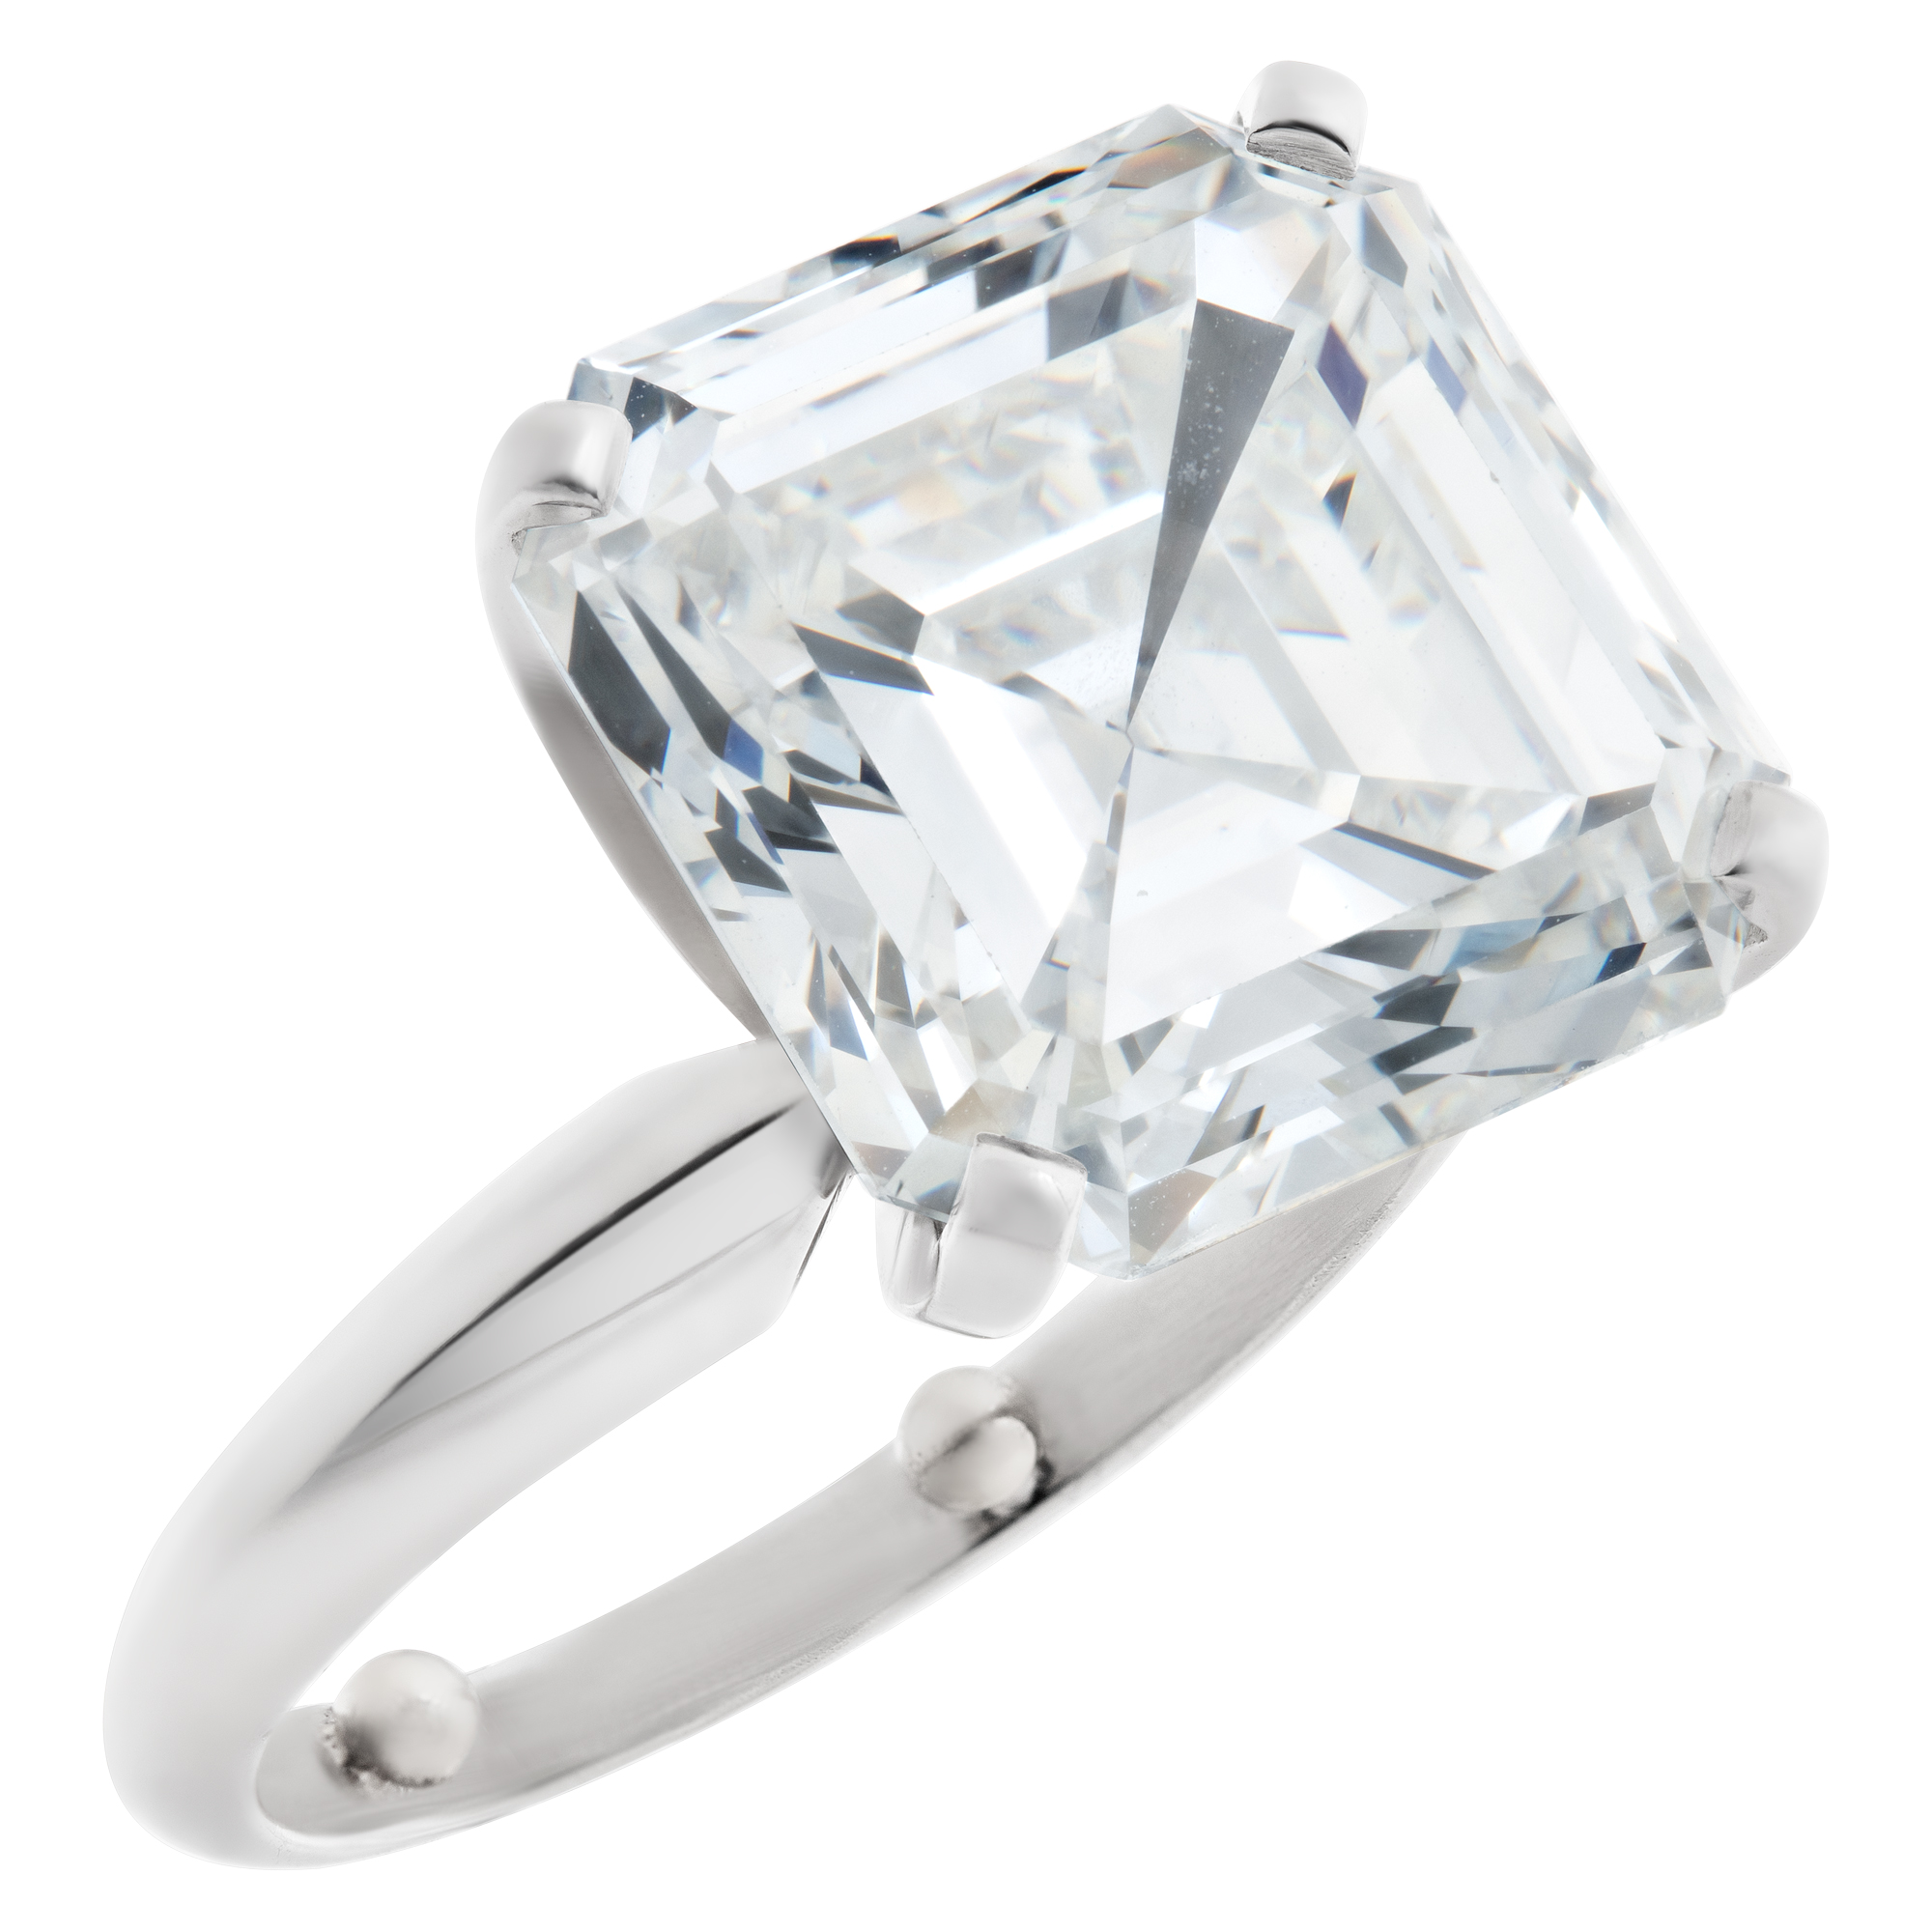 GIA certified asscher cut diamond 9.03 carat (G Color, Vs 1 Clarity) solitaire ring image 3